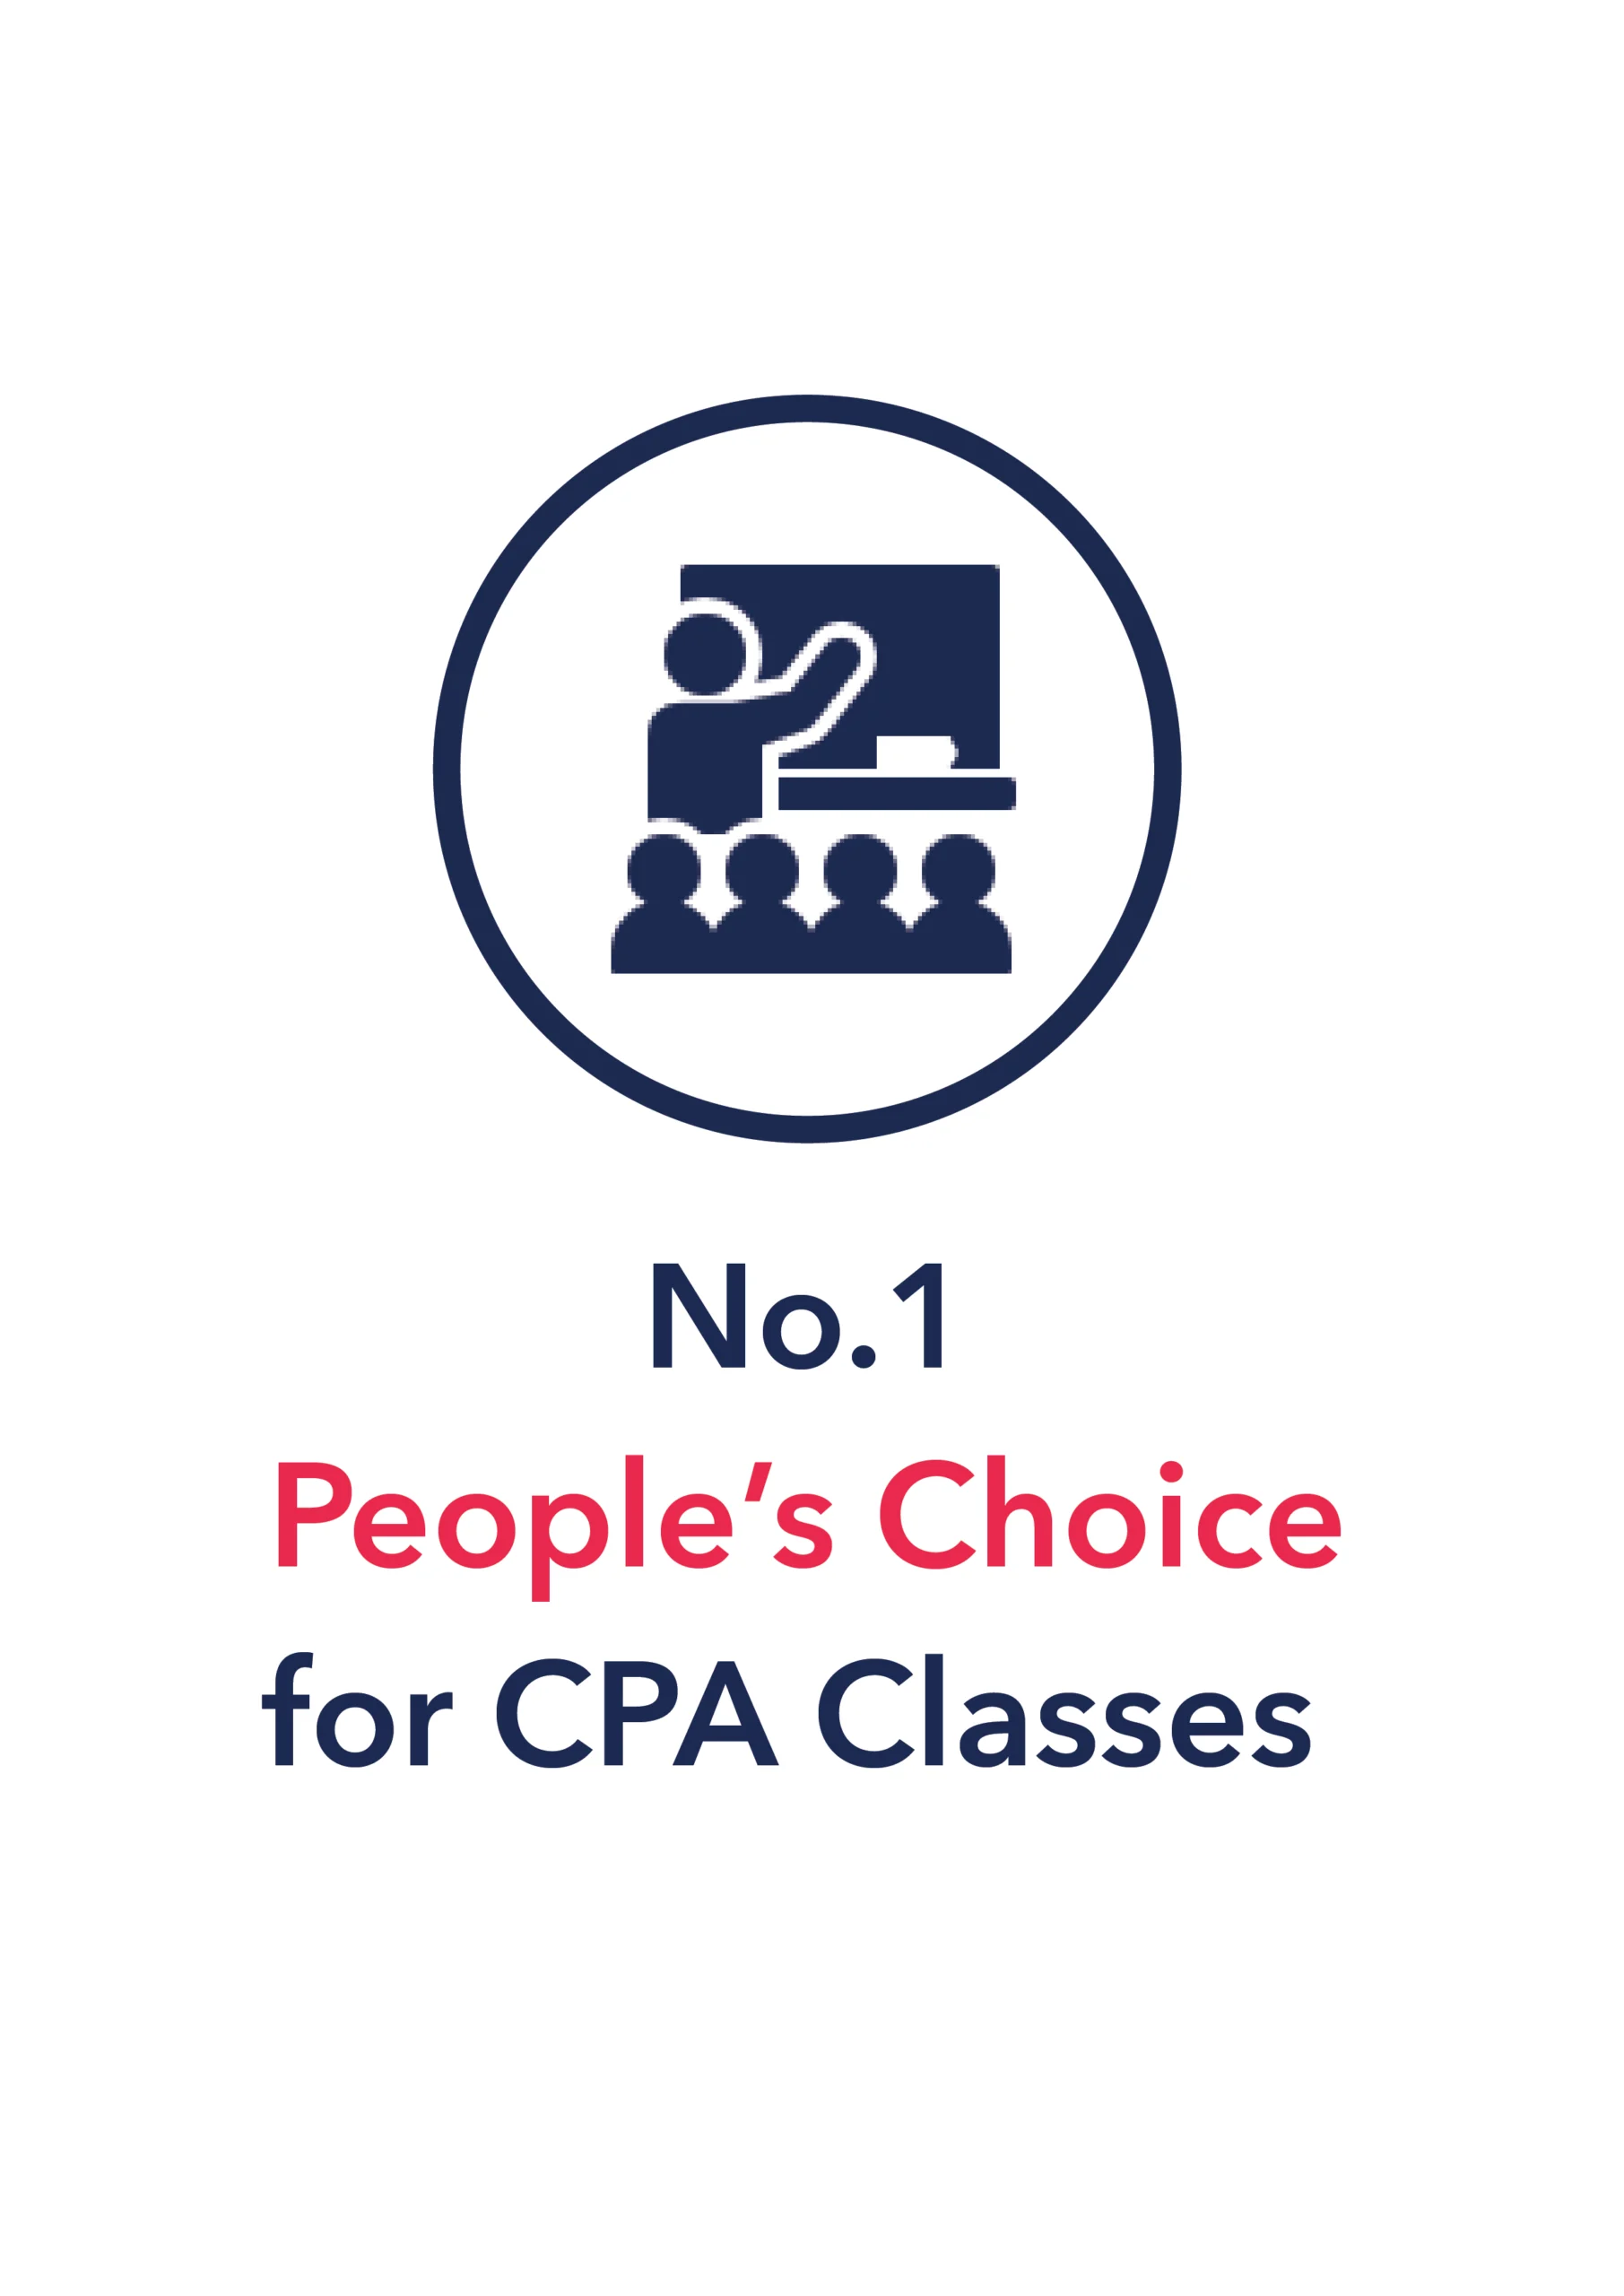 No.1 people's choice for cpa classes